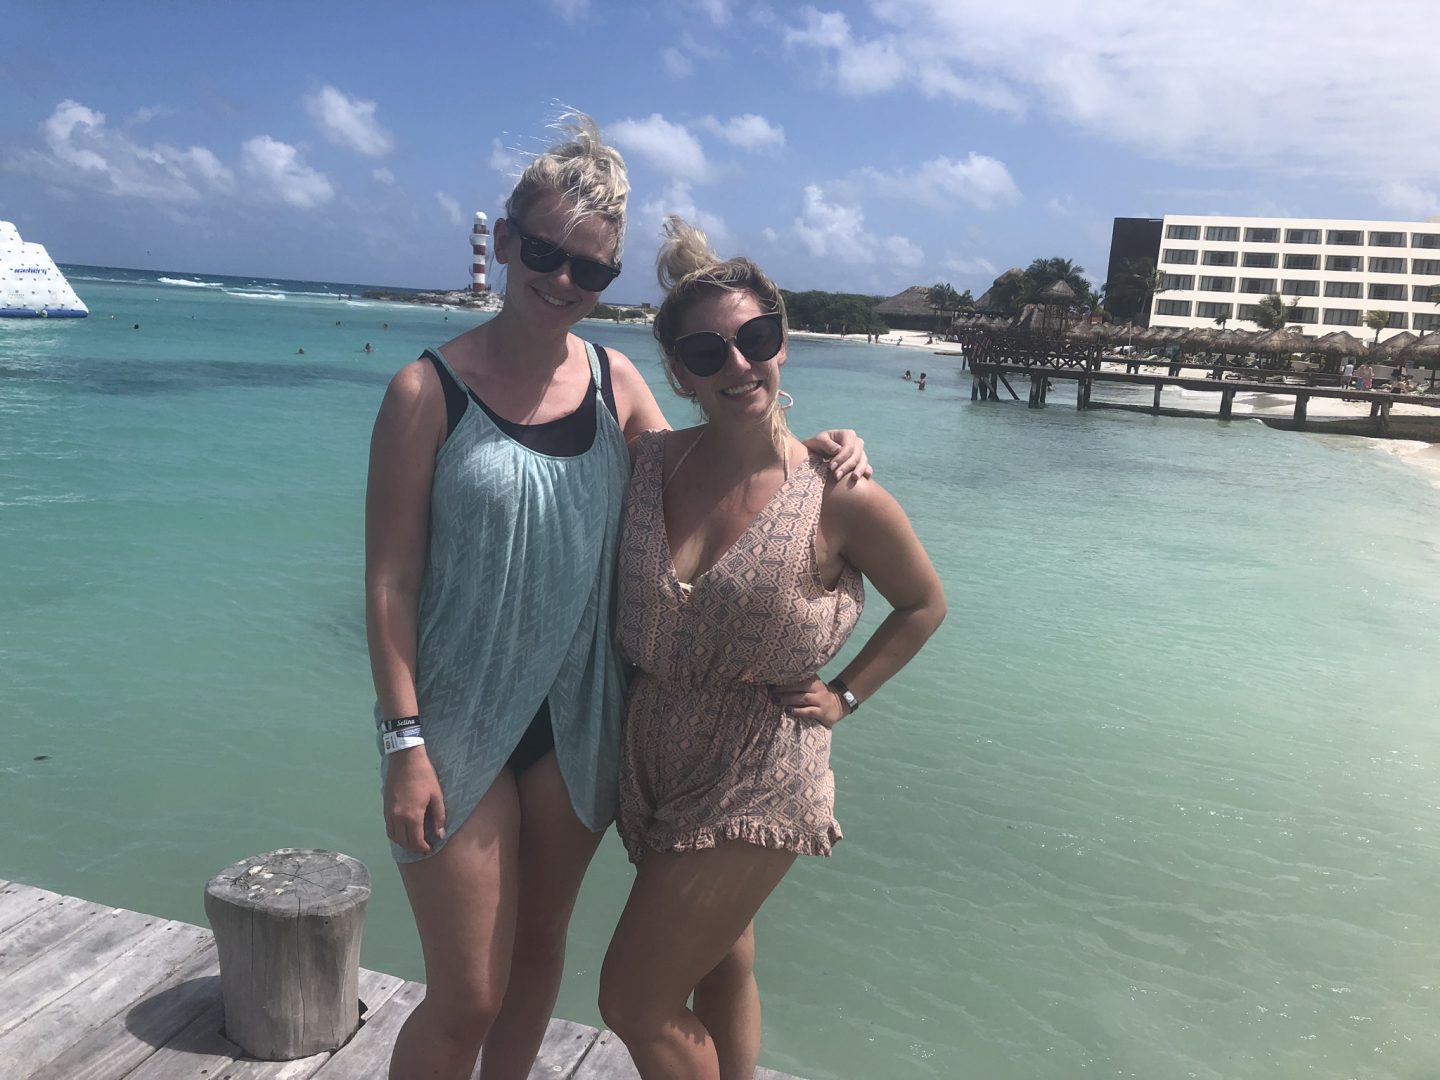 Girls by the beach in Cancun, Mexico